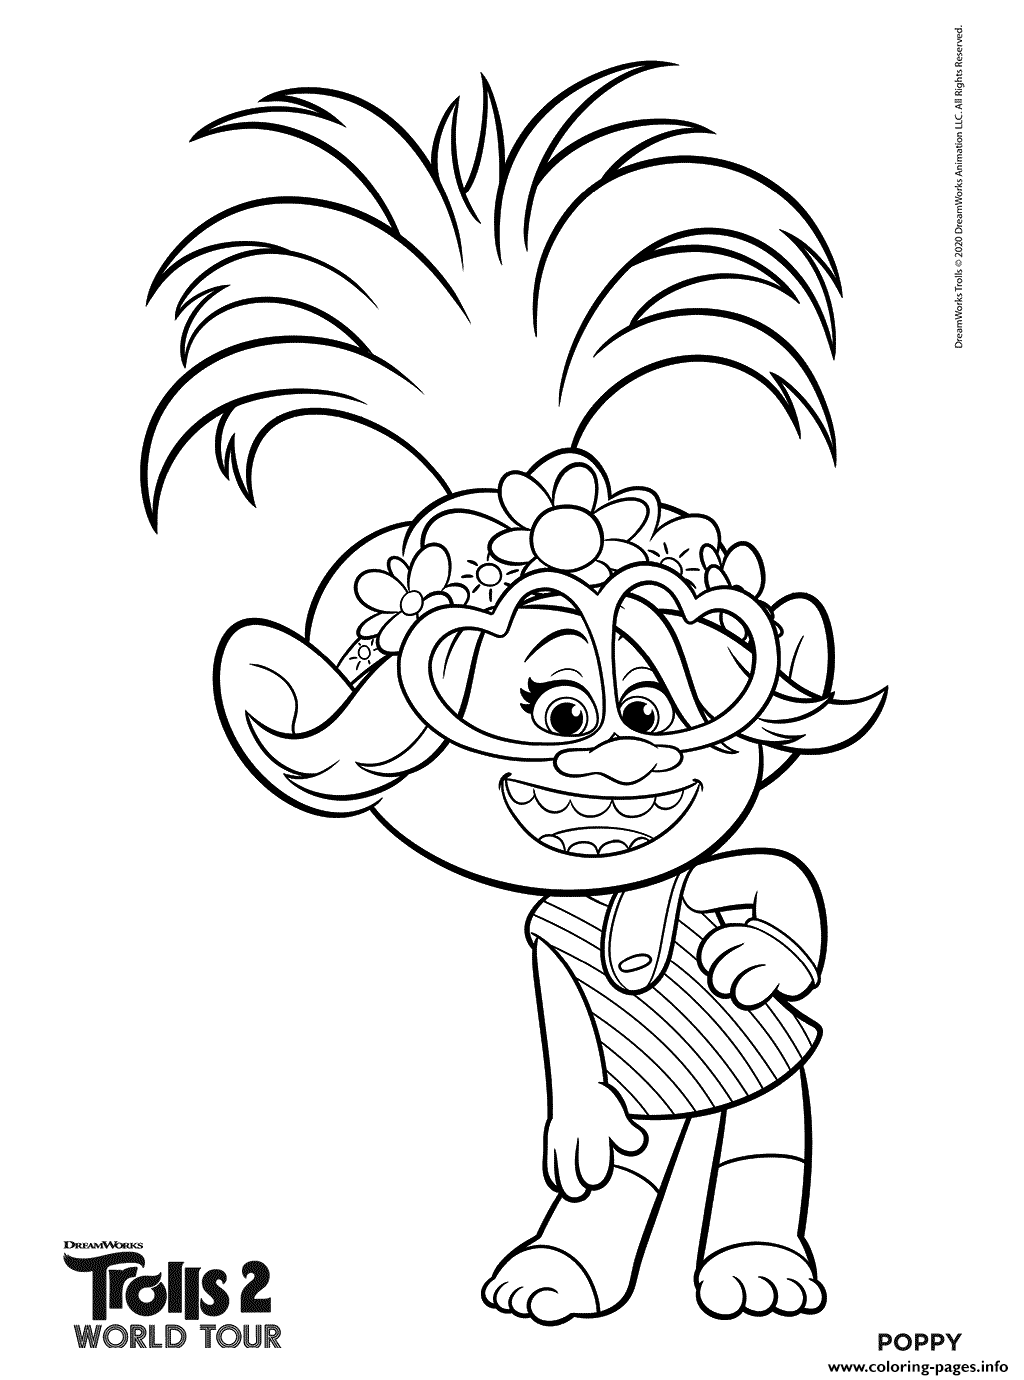 Coloring Poppy Queen Barb Trolls World Tour Coloring Page | My XXX Hot Girl